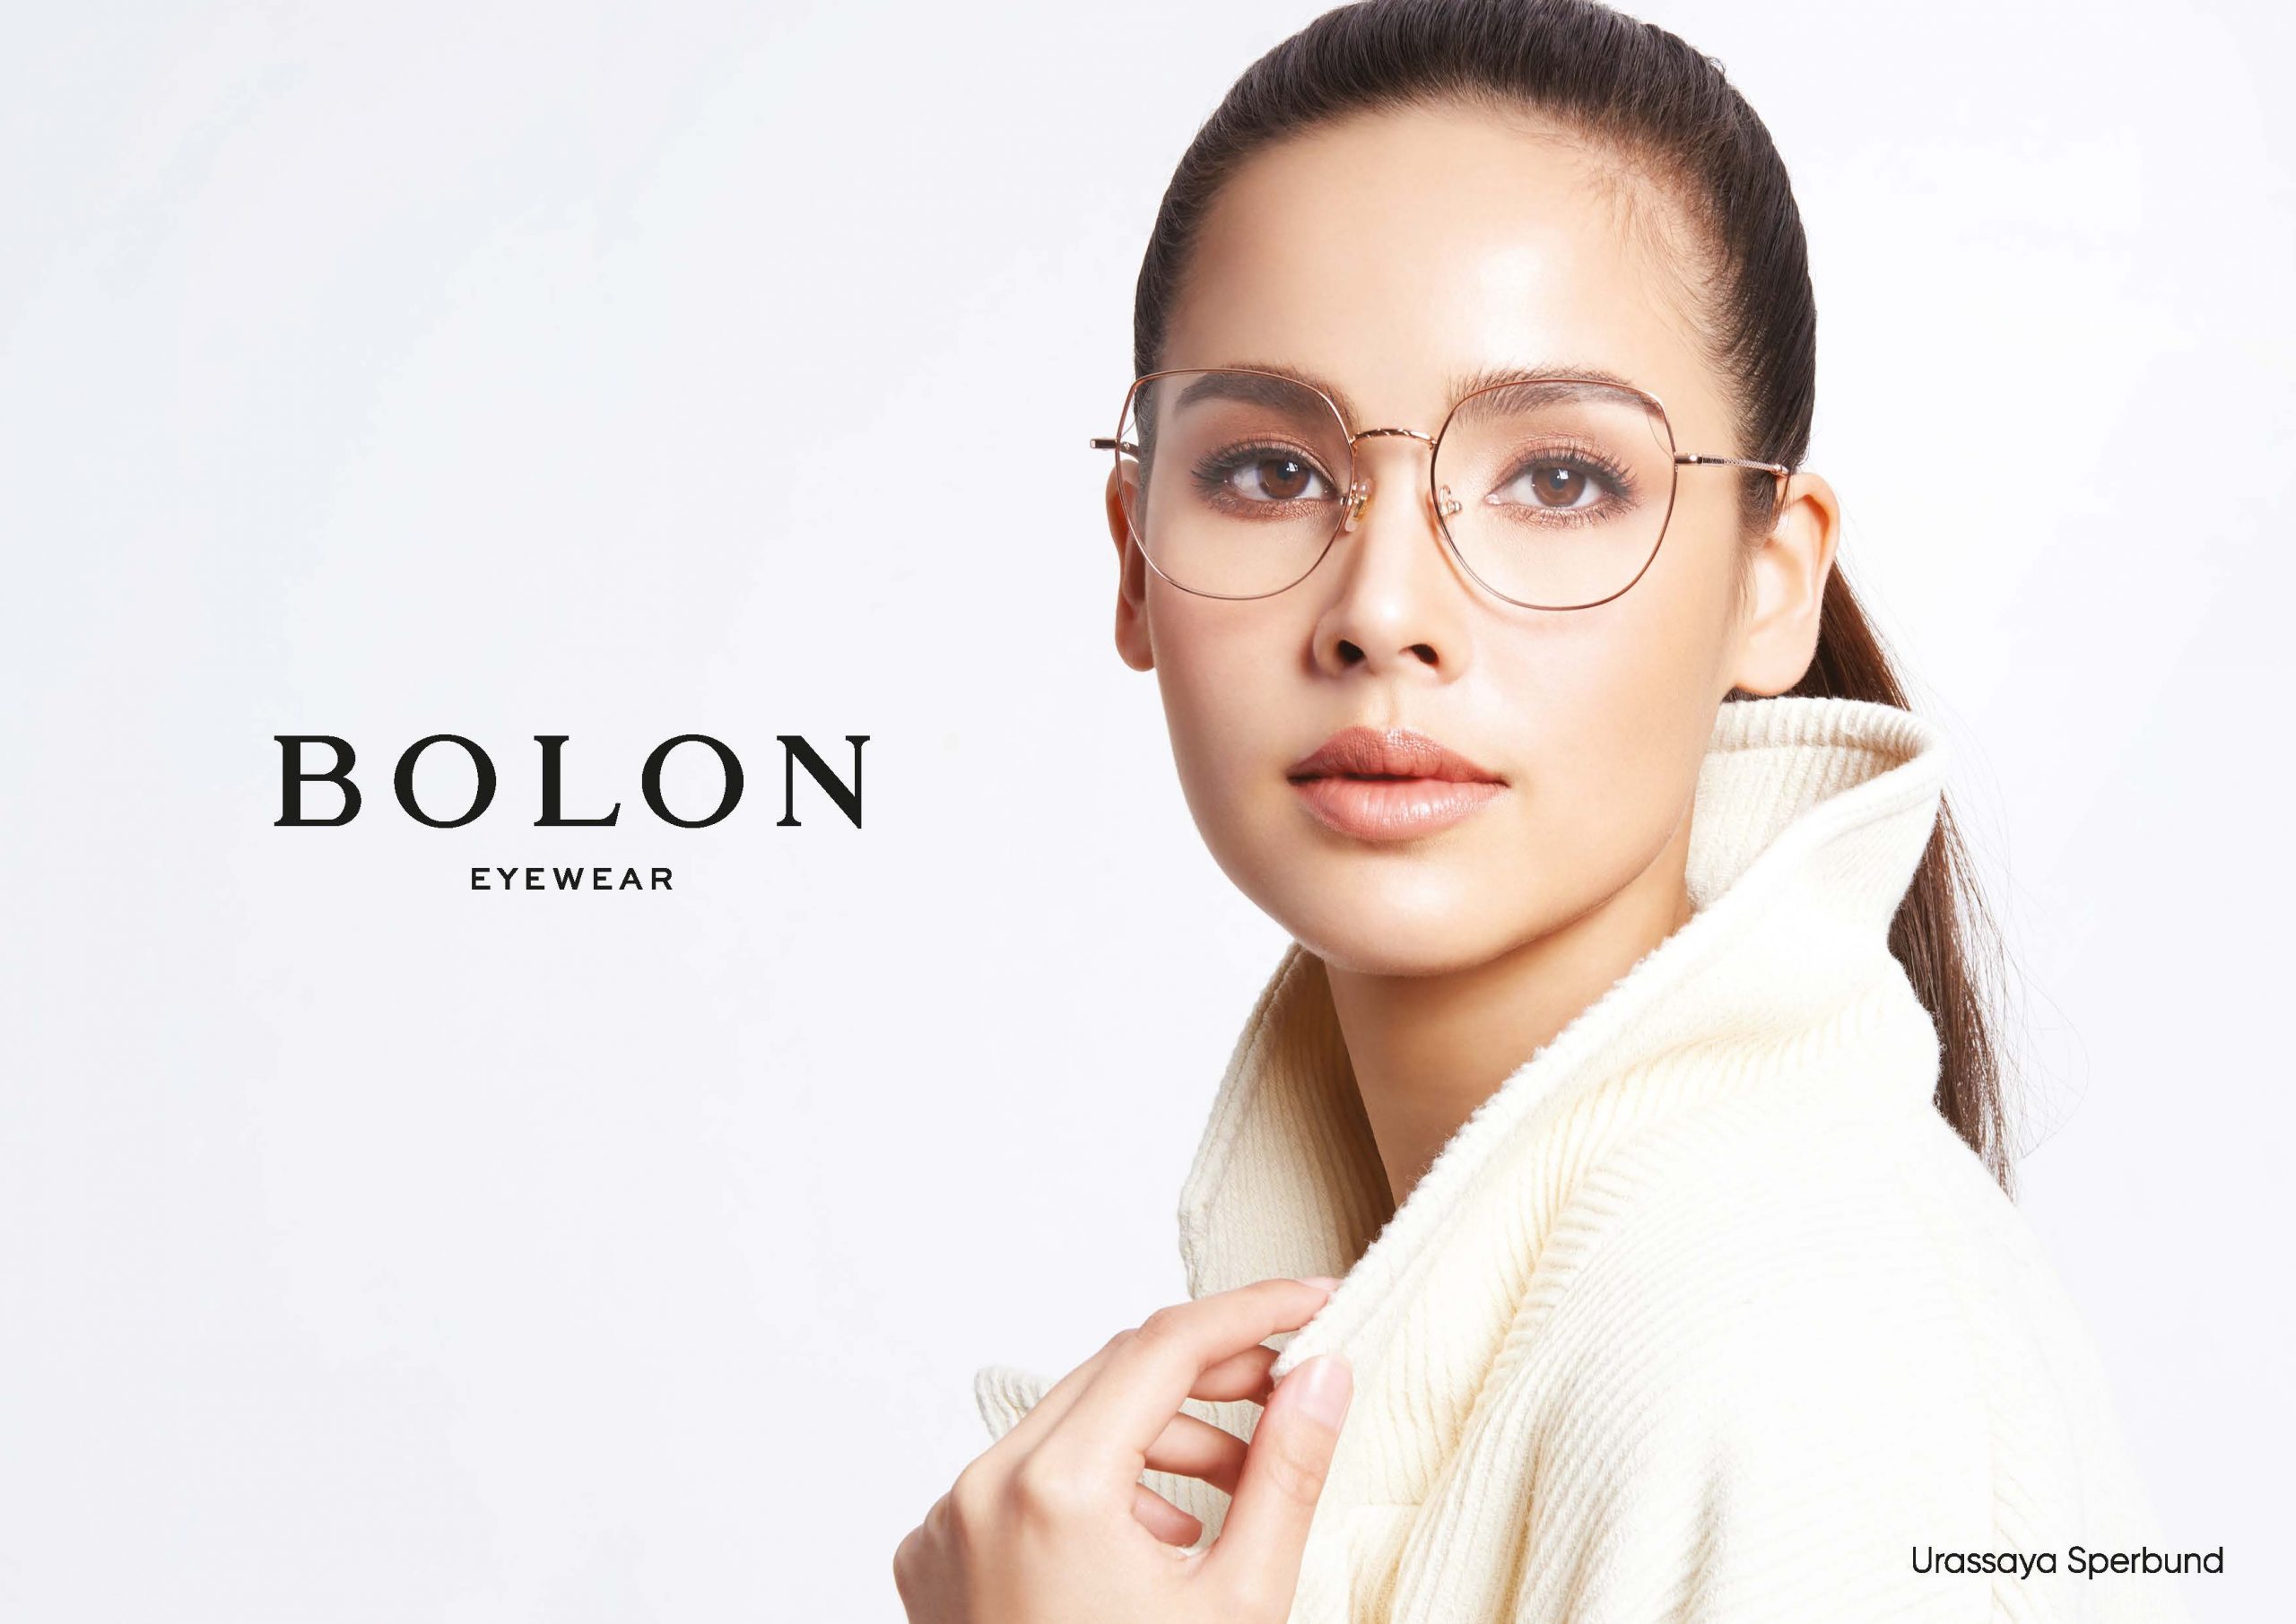 Yaya Urassaya encourages glasses wearers to feel confident and fashionable in the new Bolon Eyewear Fall/Winter 2020 Collection